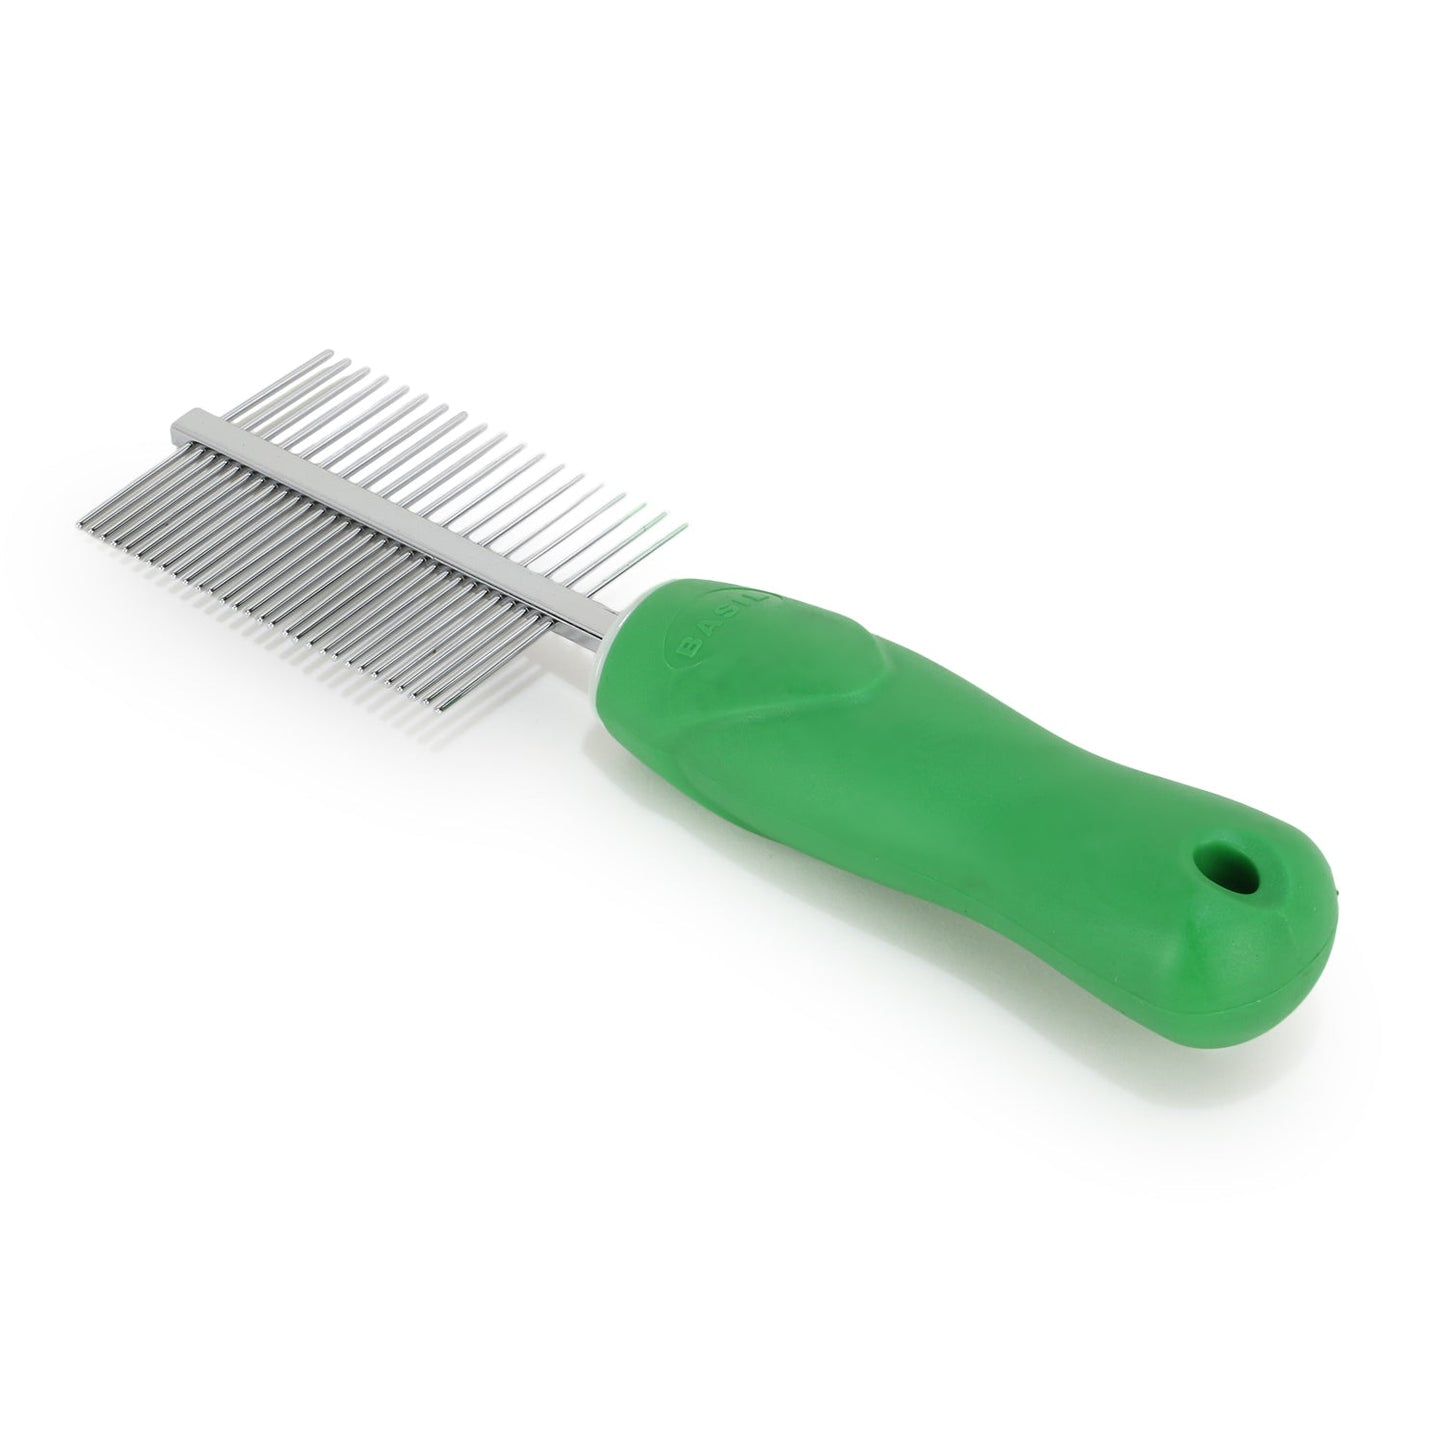 Basil Double Sided Pet Grooming Comb with Handle for Easy Grip